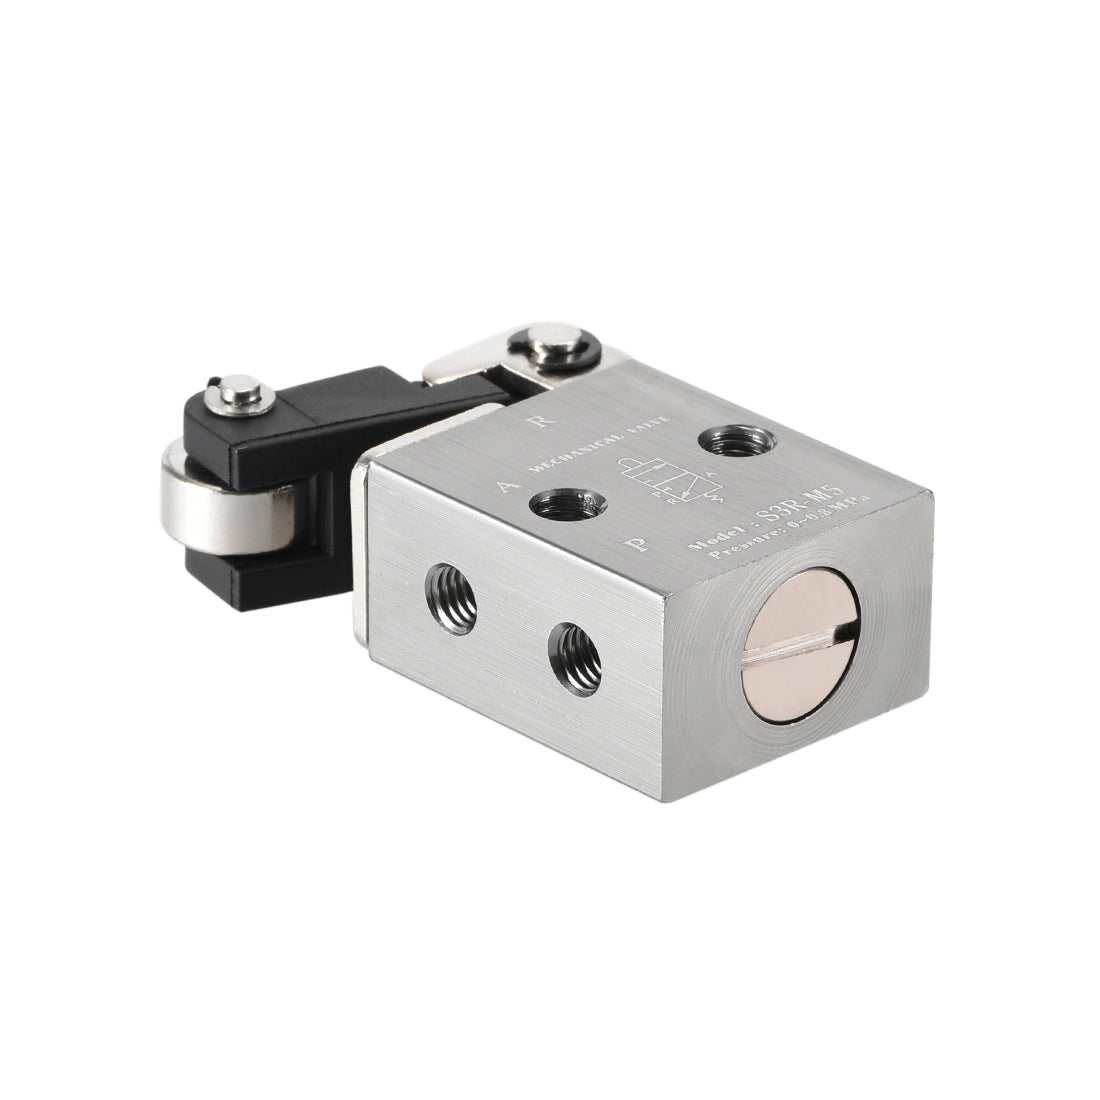 uxcell Uxcell S3R-M5 2 Position 3 Way M5 Manual Hand Pull Pneumatic Solenoid Mechanical Valve